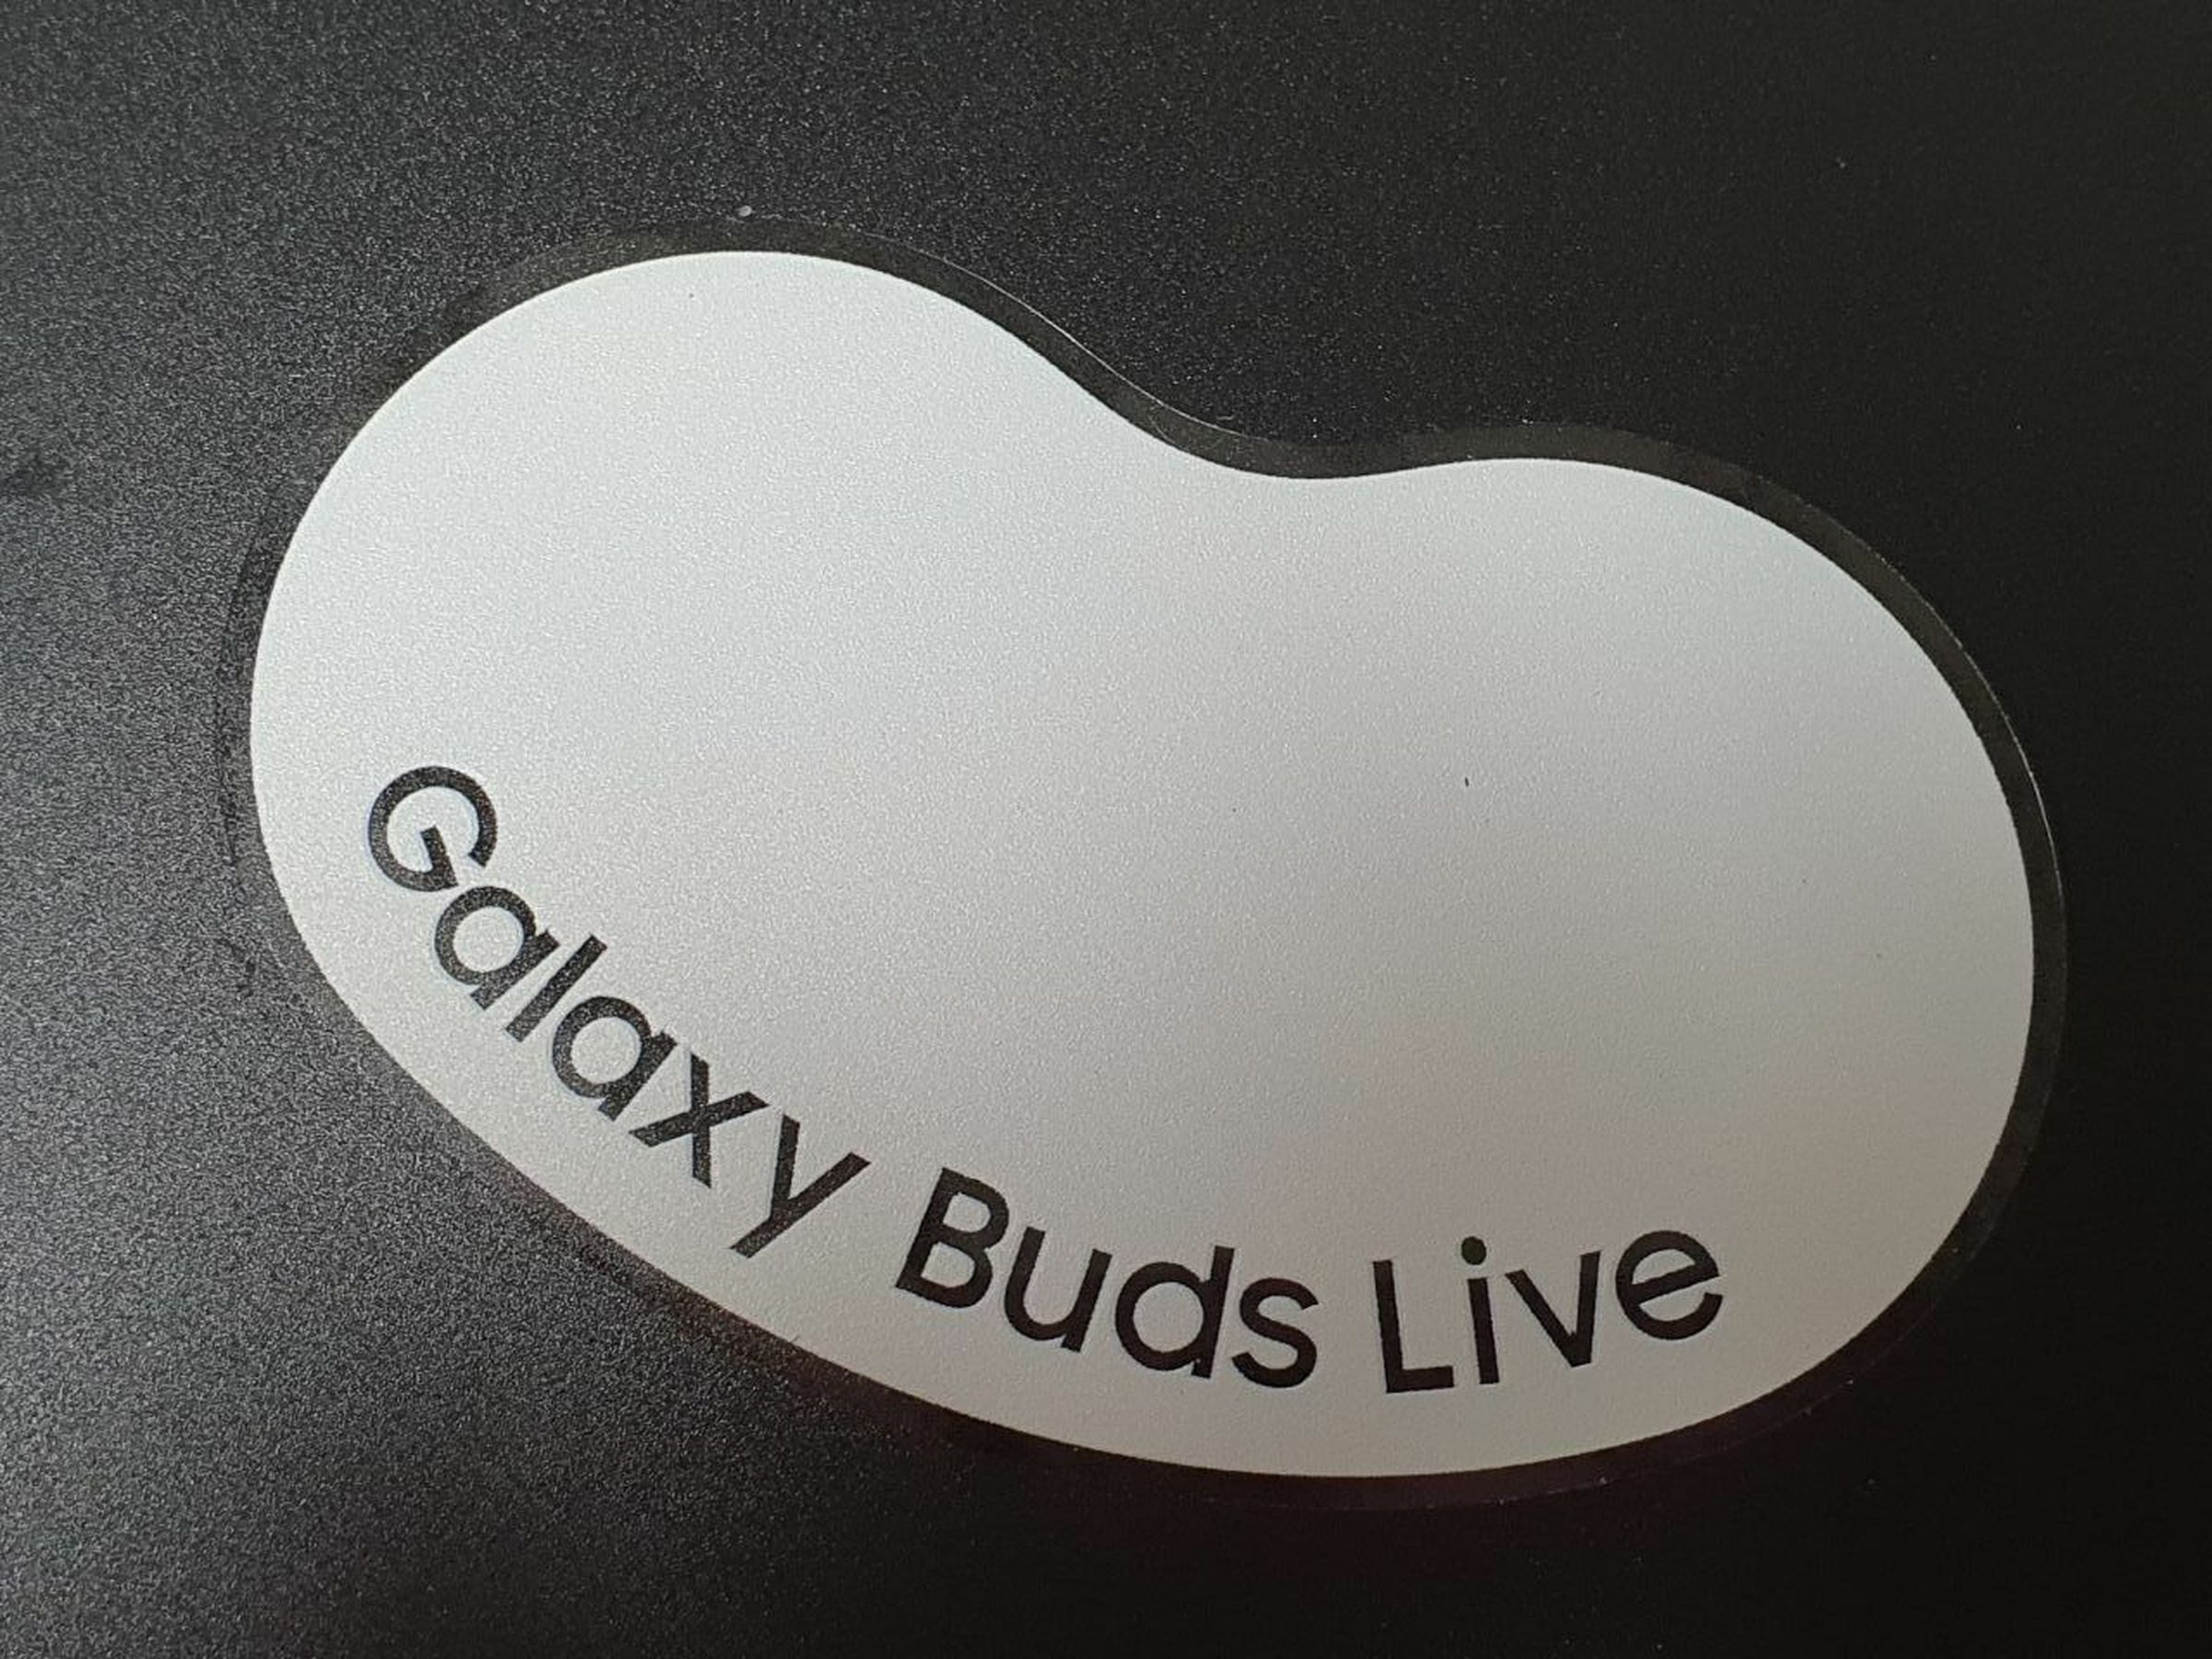 The Galaxy Buds Live design team had these stickers made to celebrate the finished product.